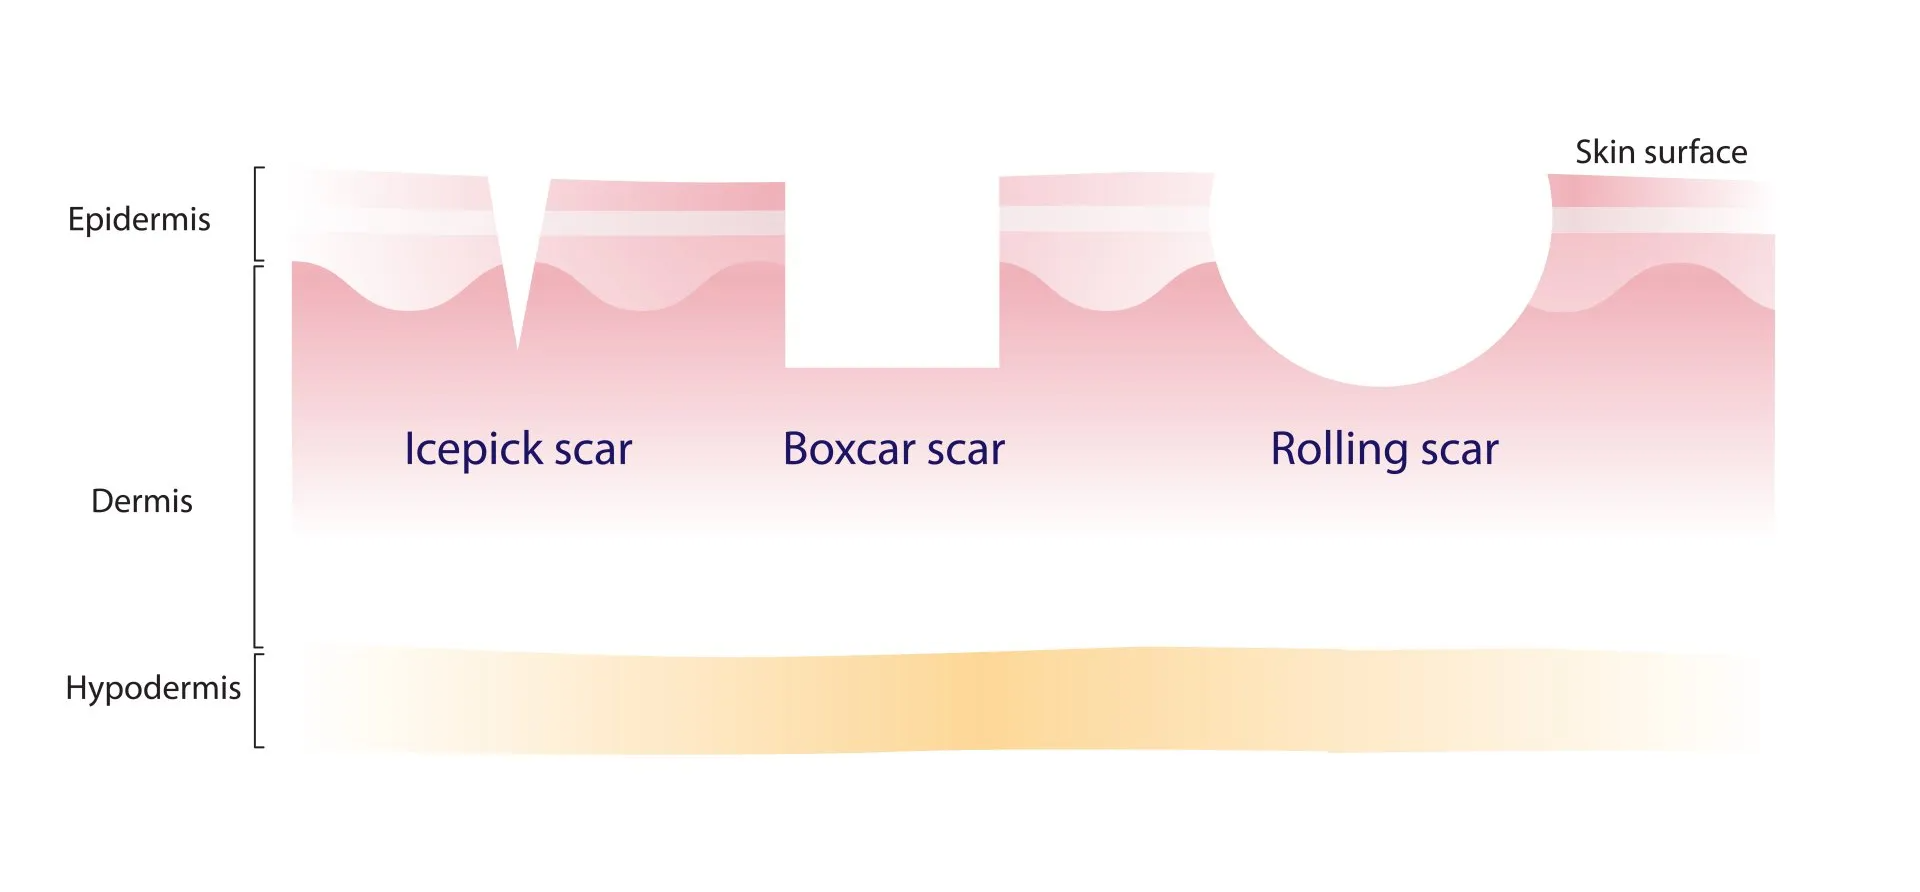 Image of All Different Acne Scars: Boxcar, Icepick, and Rolling Scars